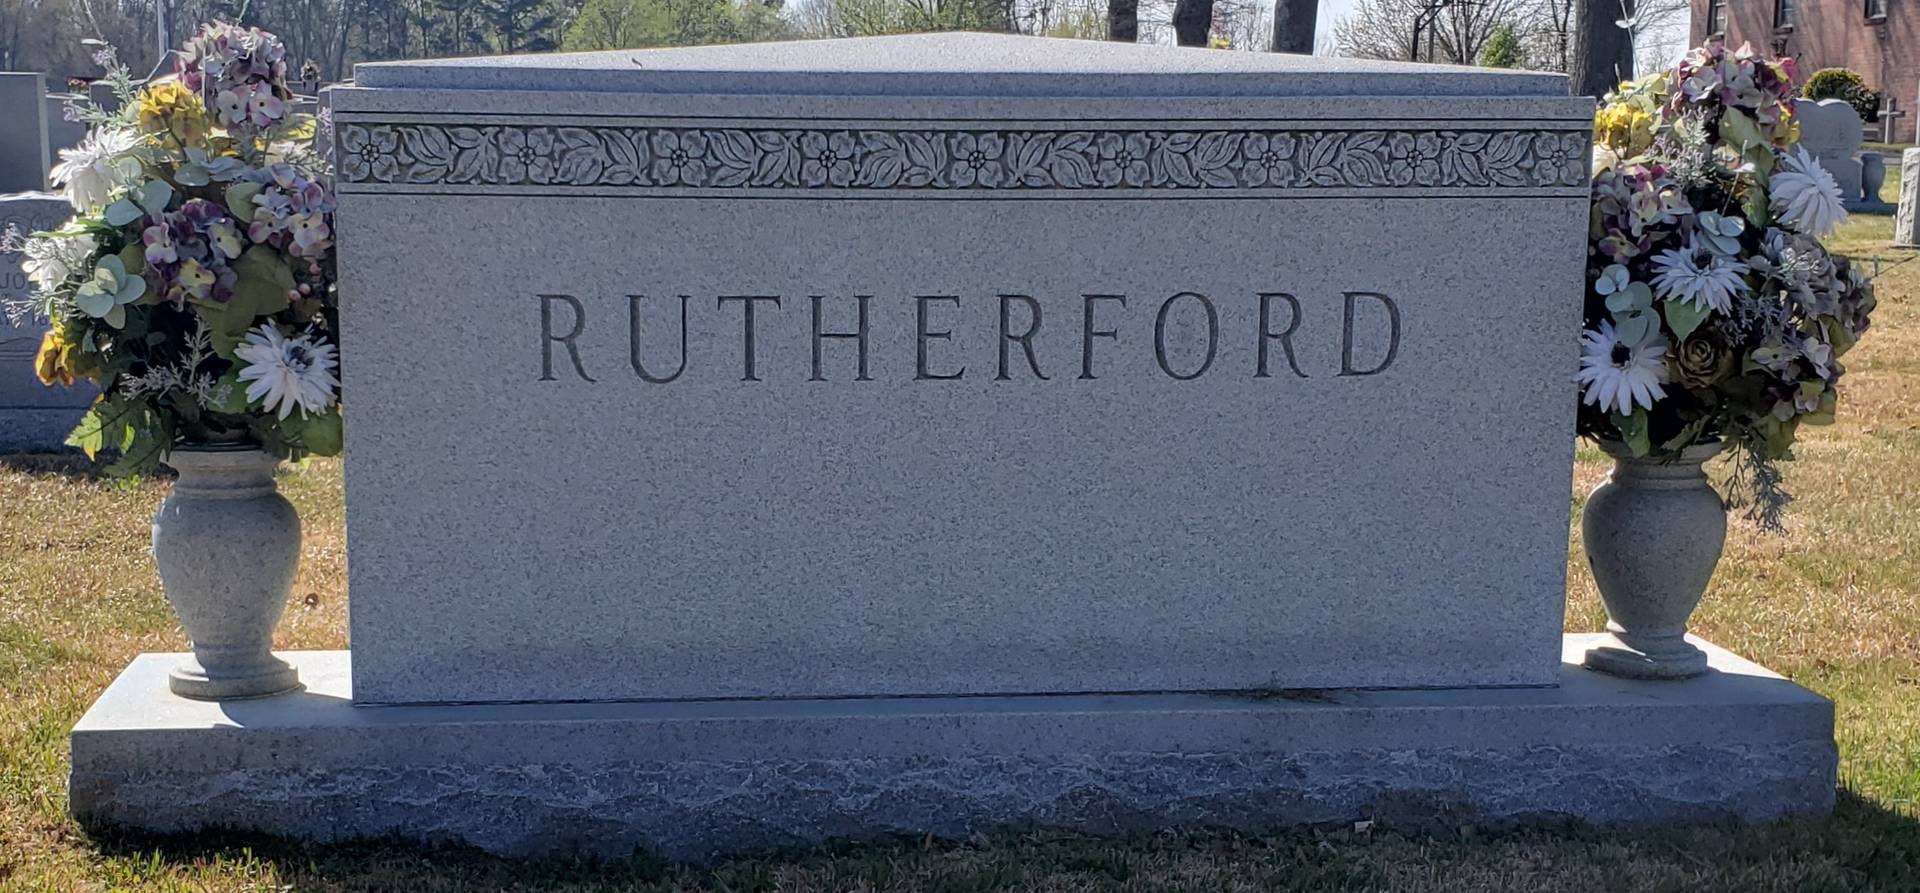 A memorial slab with the name and illustration by the text Rutherford